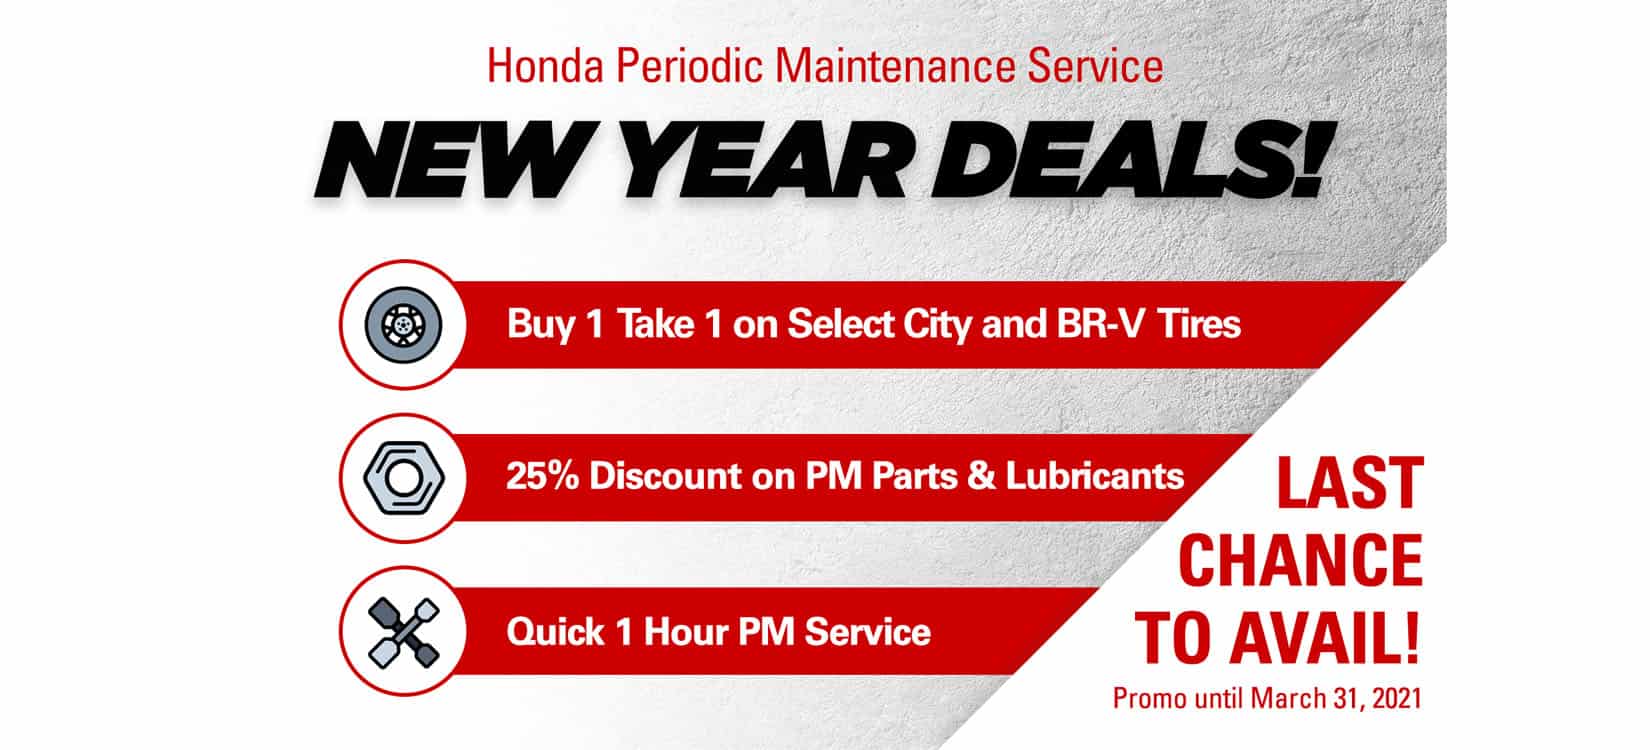 Last chance to avail Hondaâ€™s service deals and promos offerings until March 31